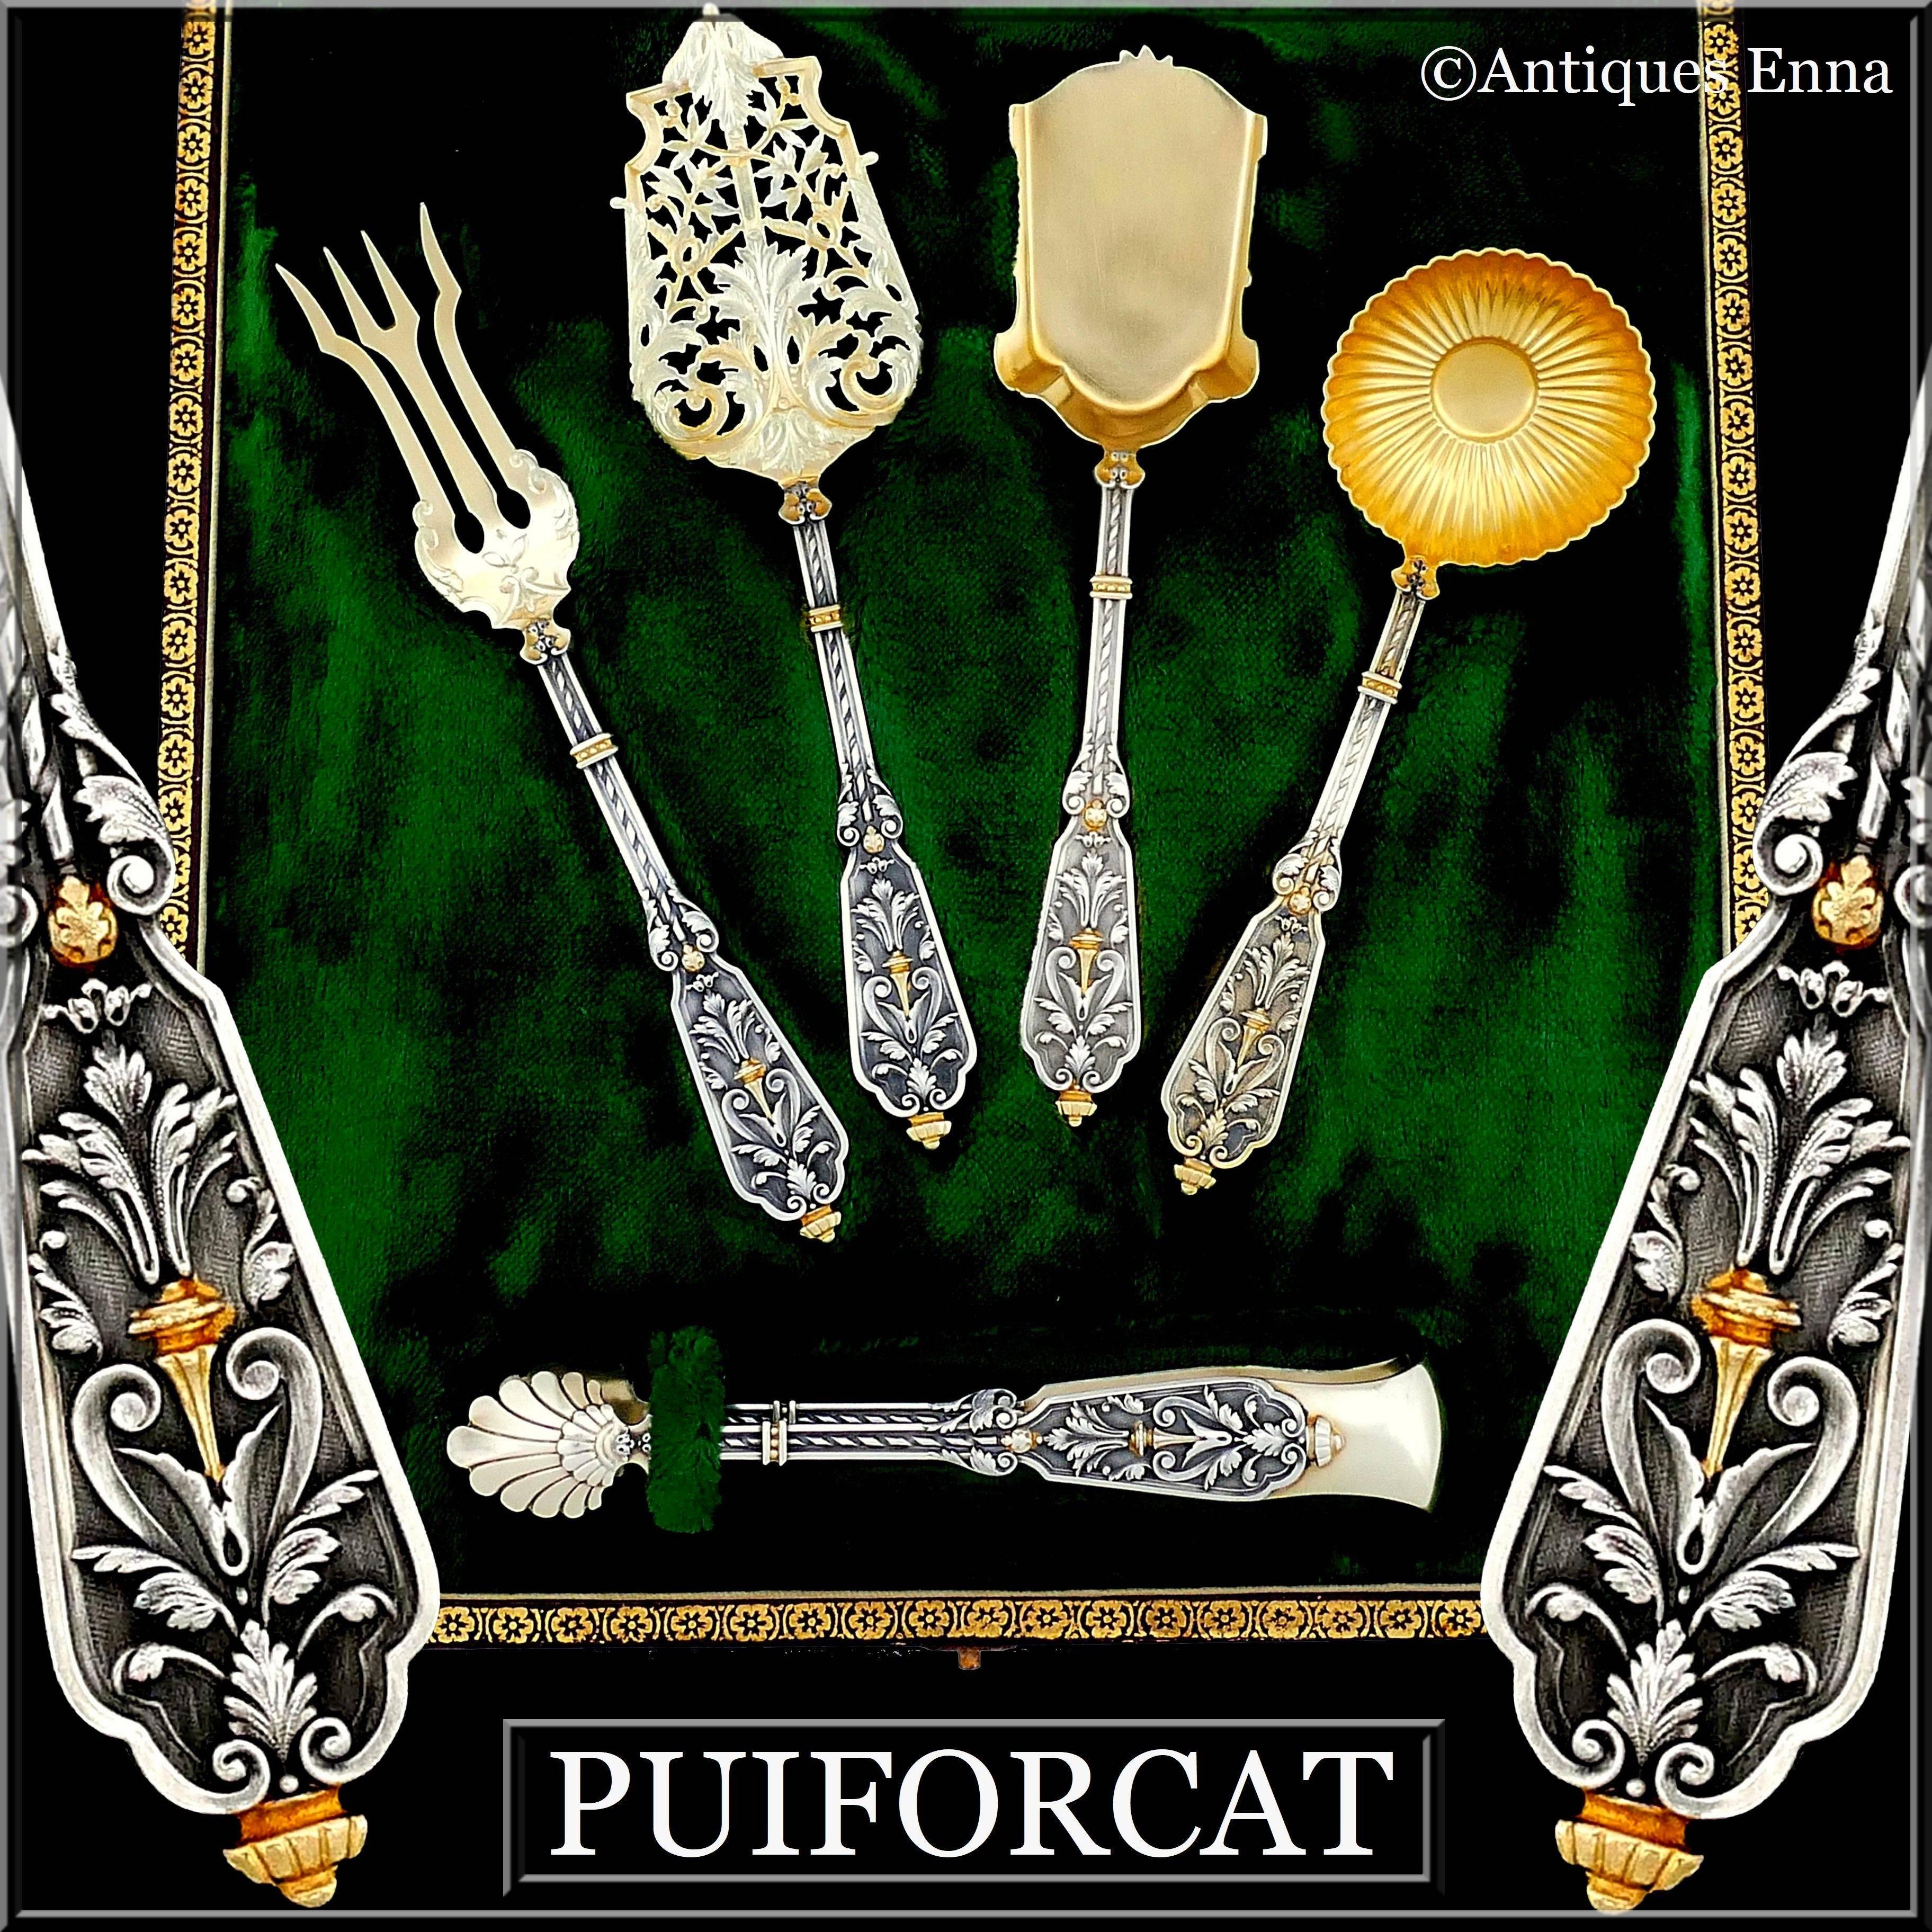 Head of Minerve first titre for the sugar tong, 950/1000 French sterling silver vermeil guarantee. Boar's Head for the other four pieces, 800/1000 French sterling silver guarantee. The quality of the gold used to recover sterling silver is a minimum